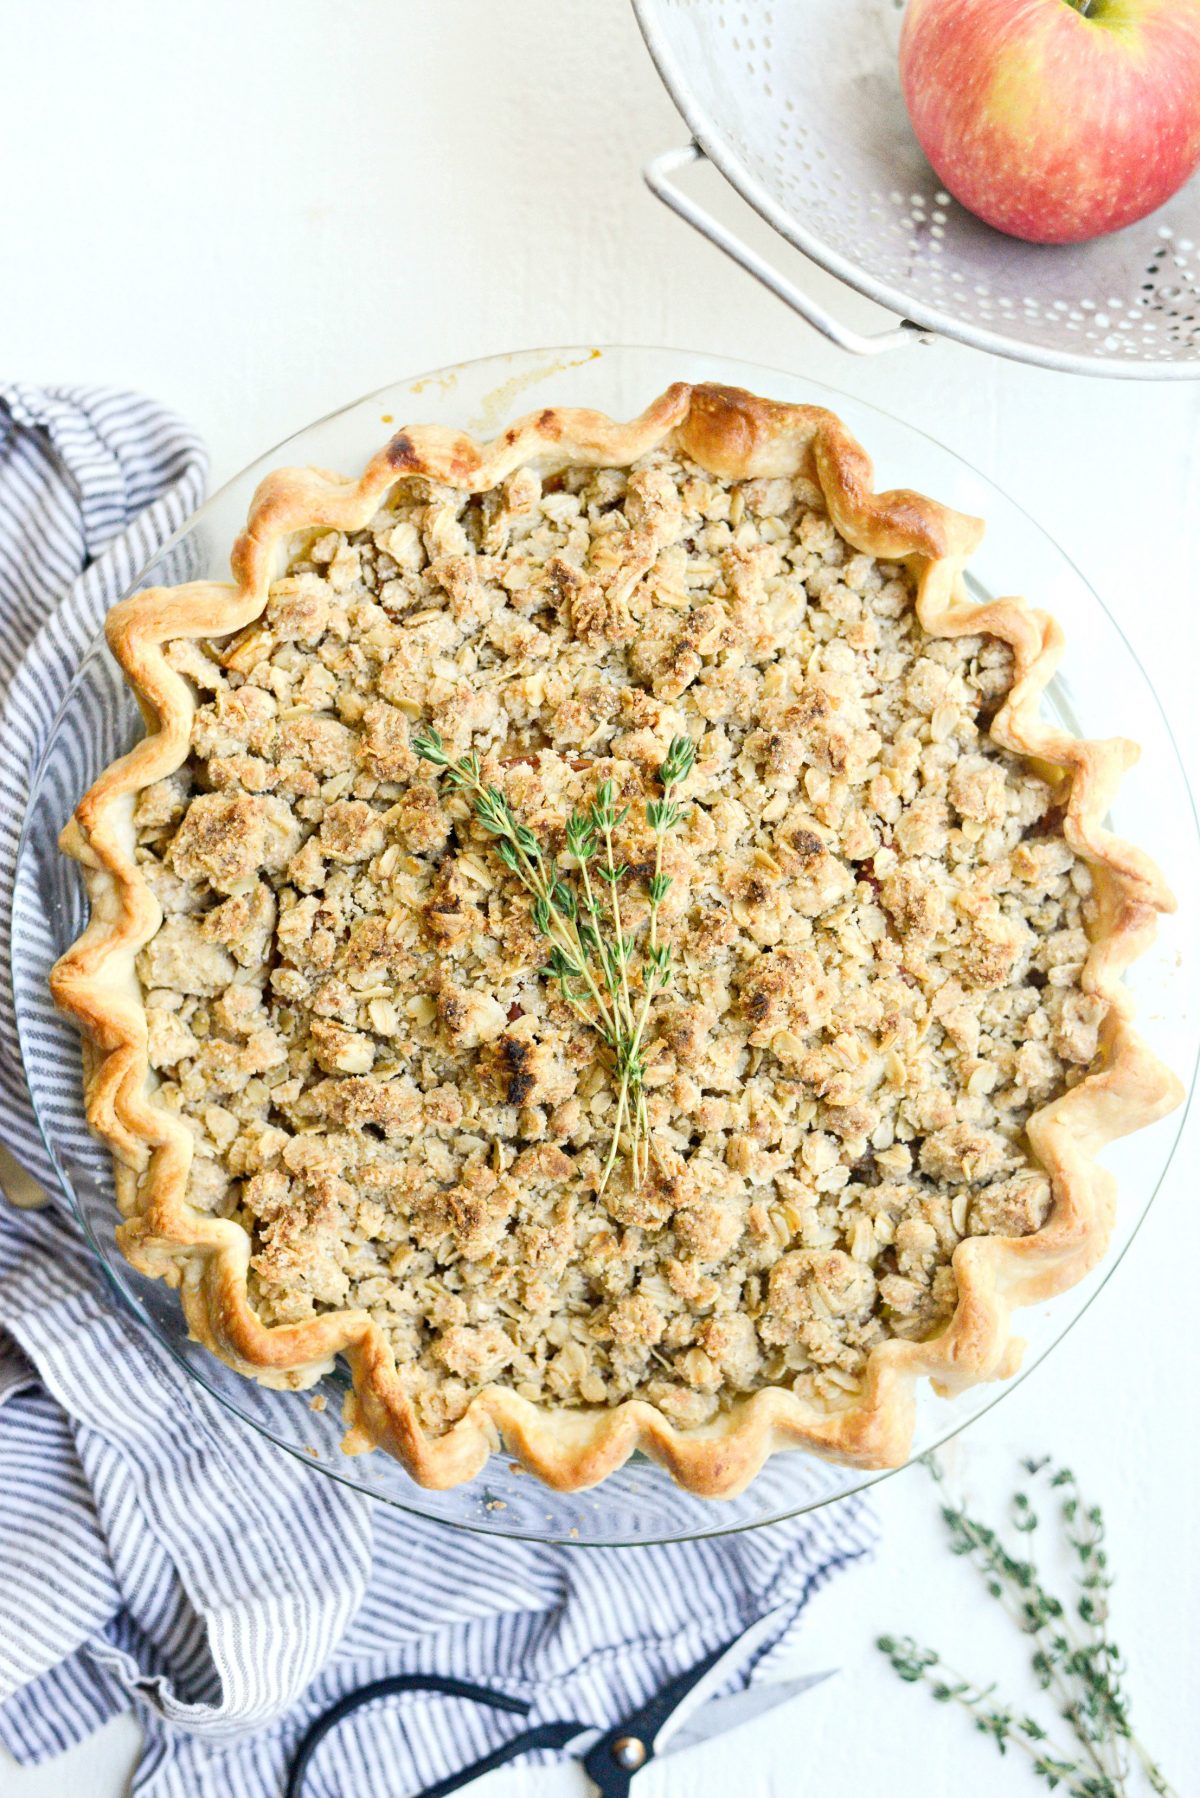 Rustic Brown Sugar Apple Pie with Oatmeal Thyme Crumble